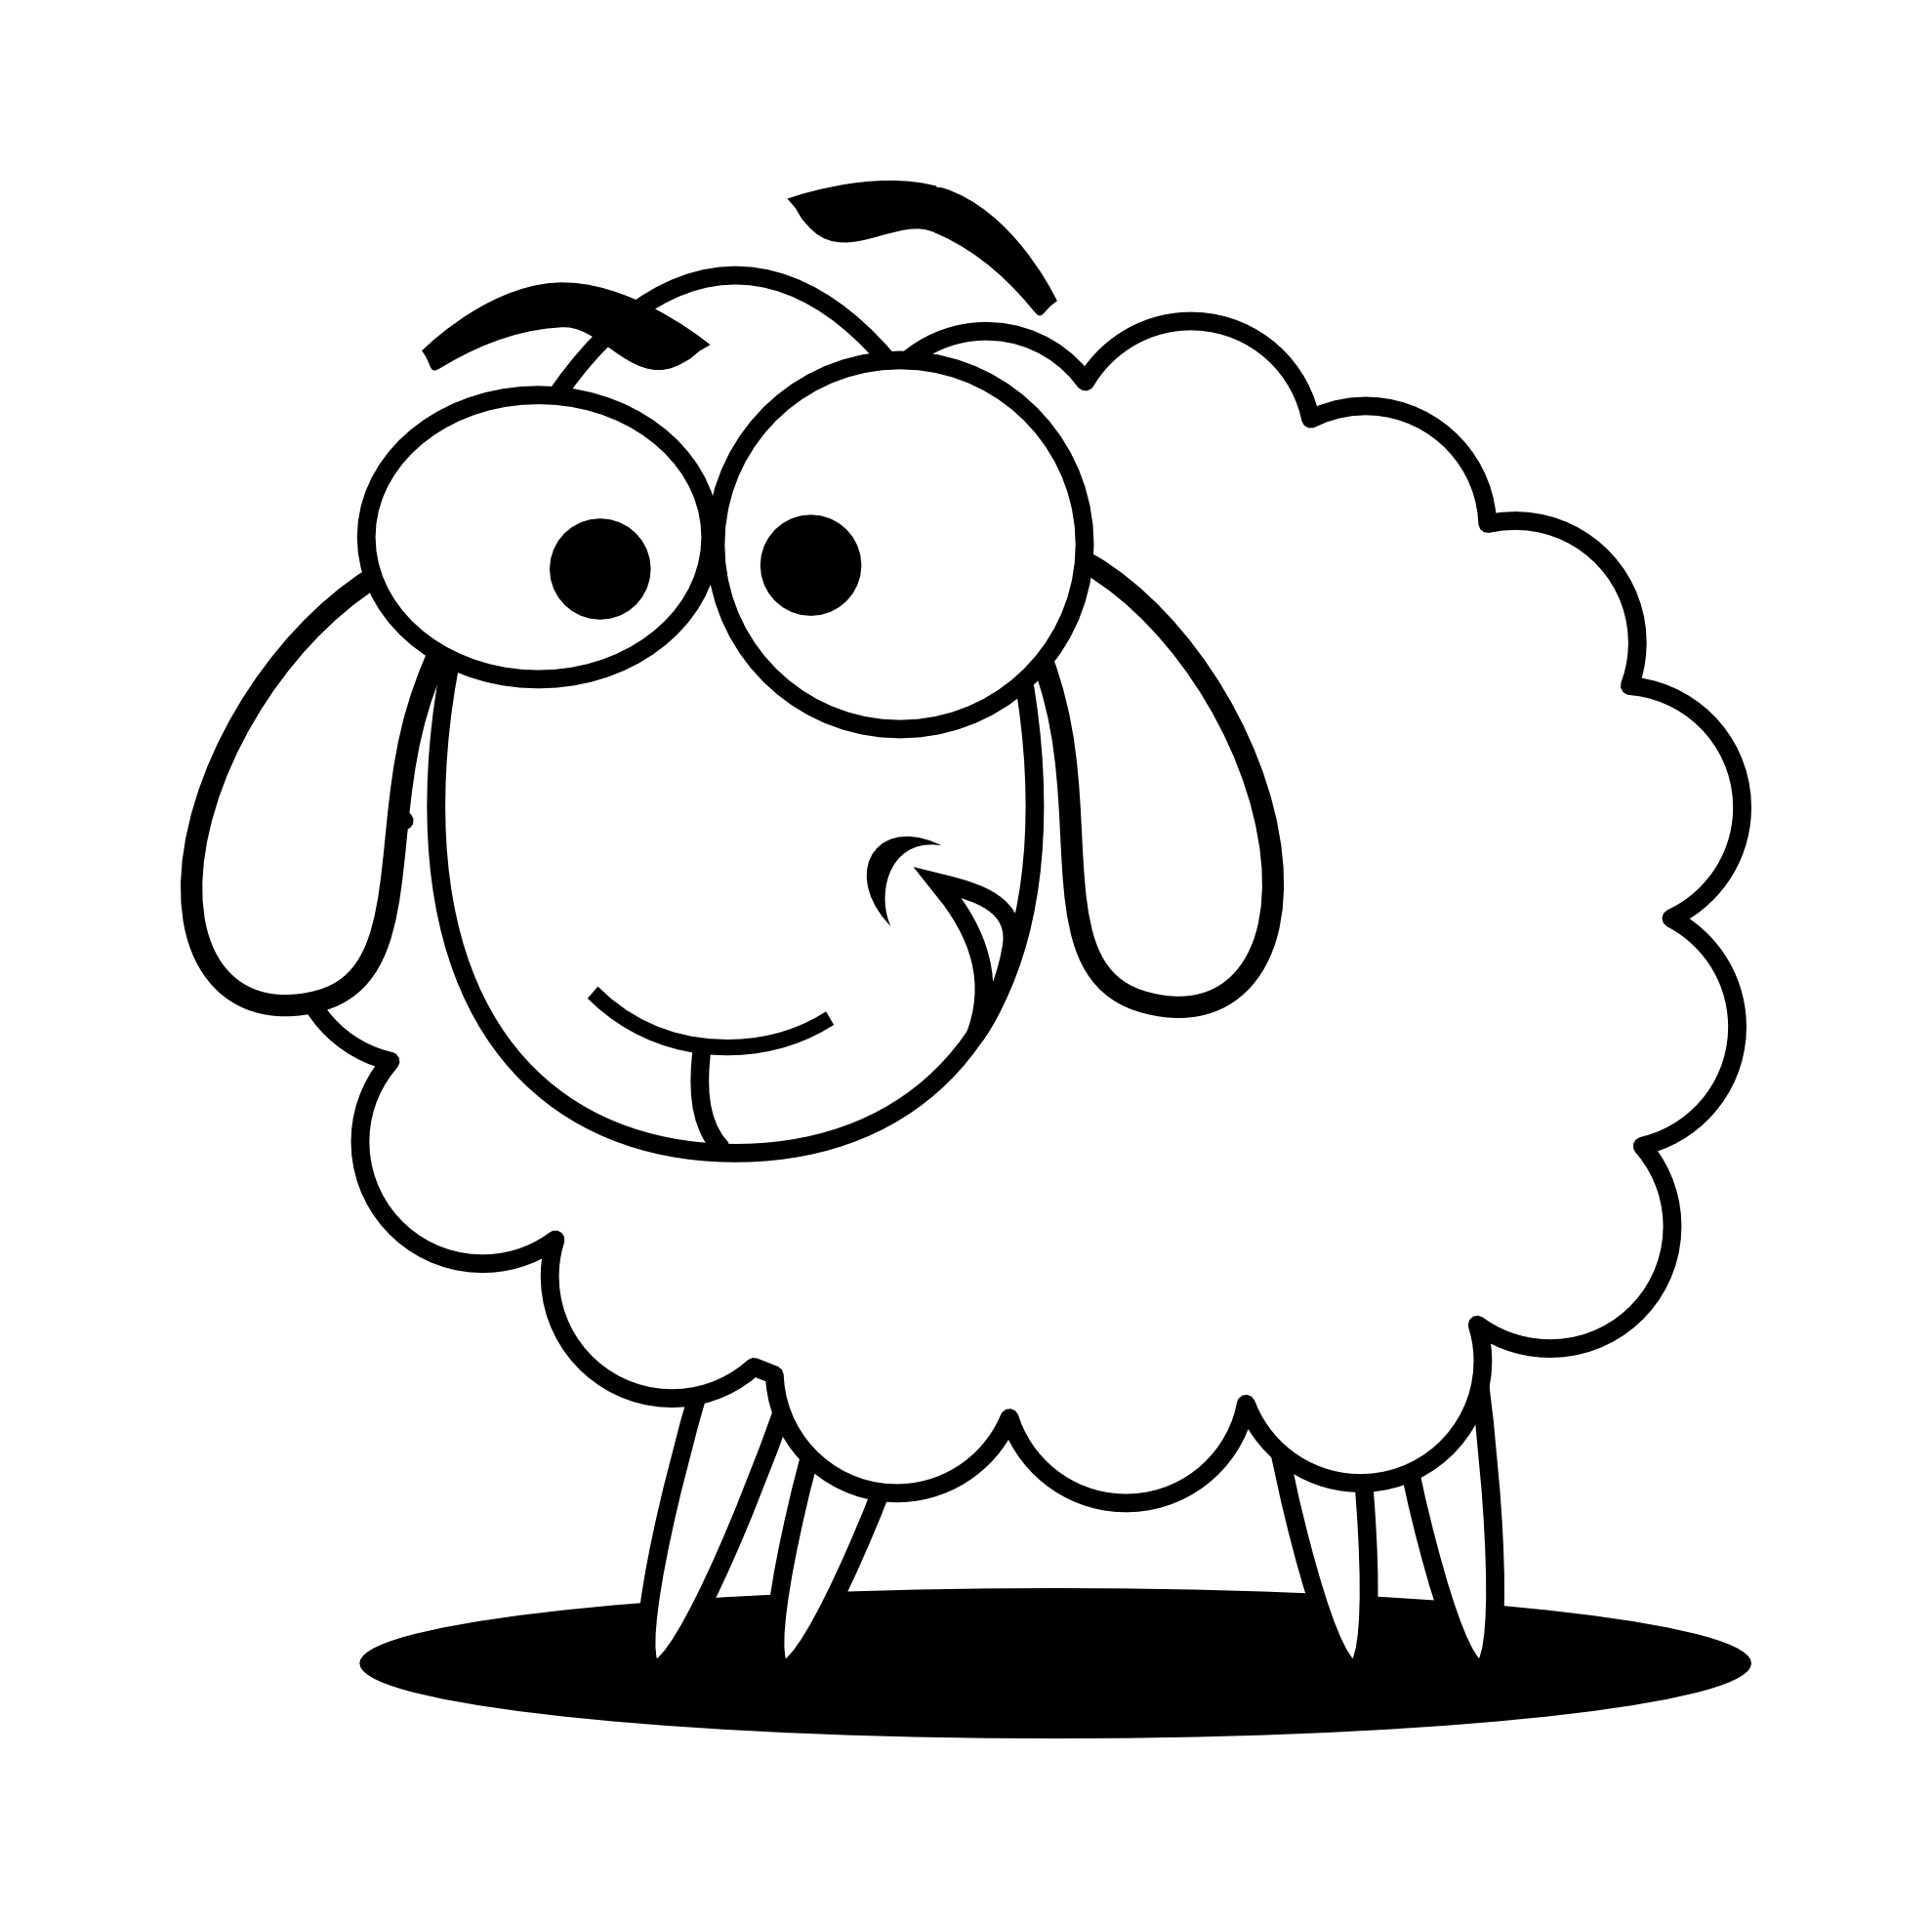 Sheep  black and white sheep lamb clipart black and white free images